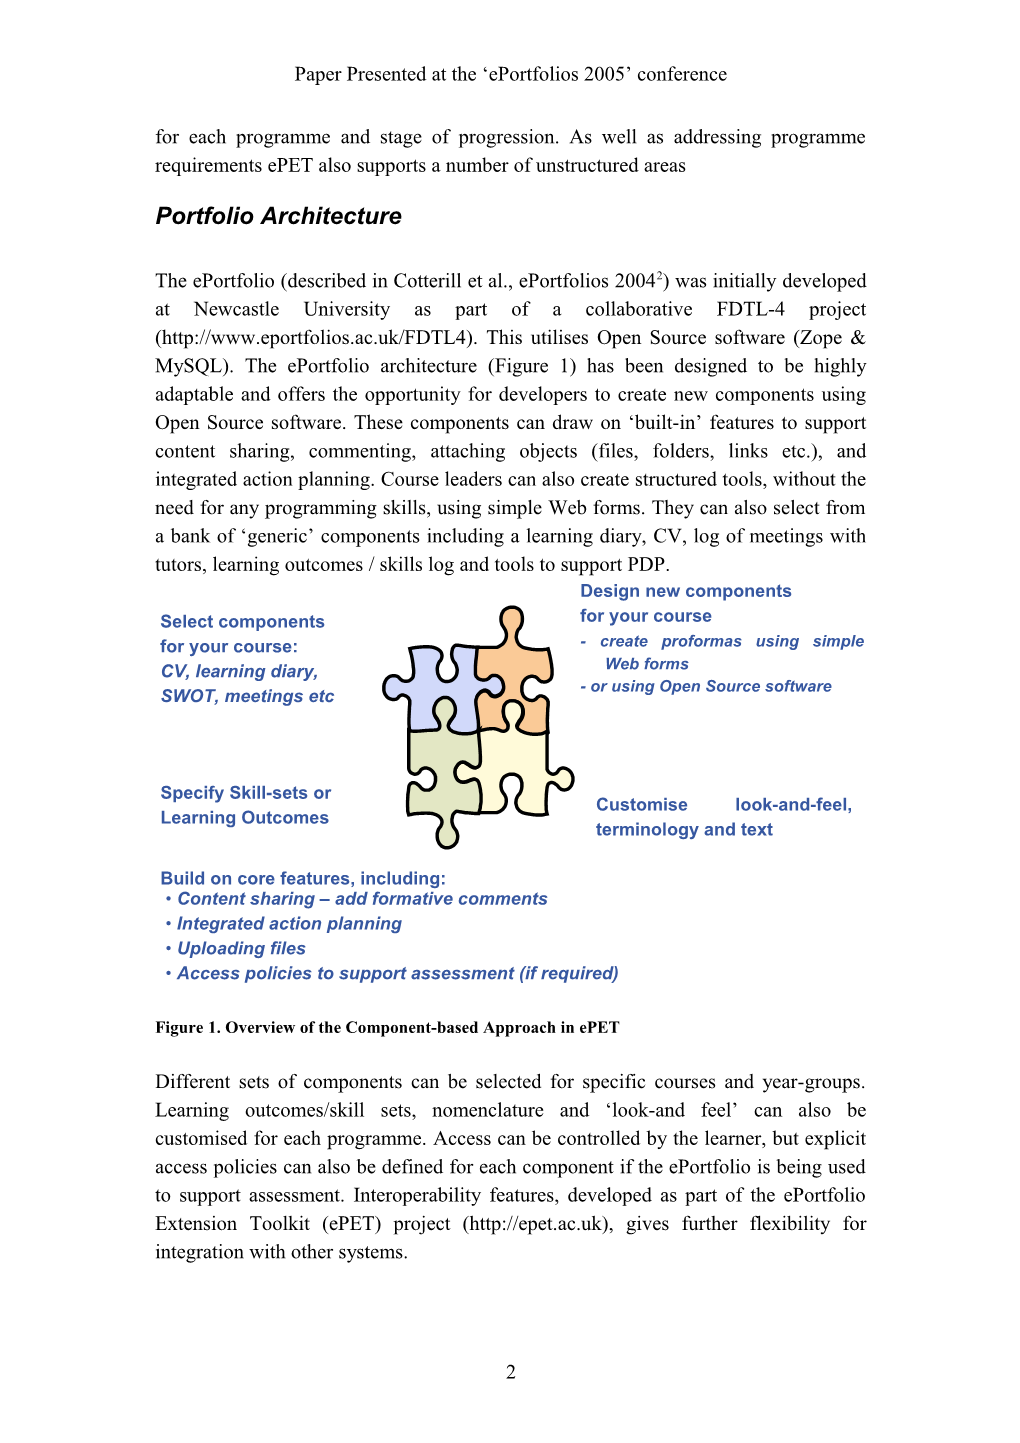 A Component-Based Eportfolio: Adapting Technology to Suit Pedagogy and Not Vice-Versa